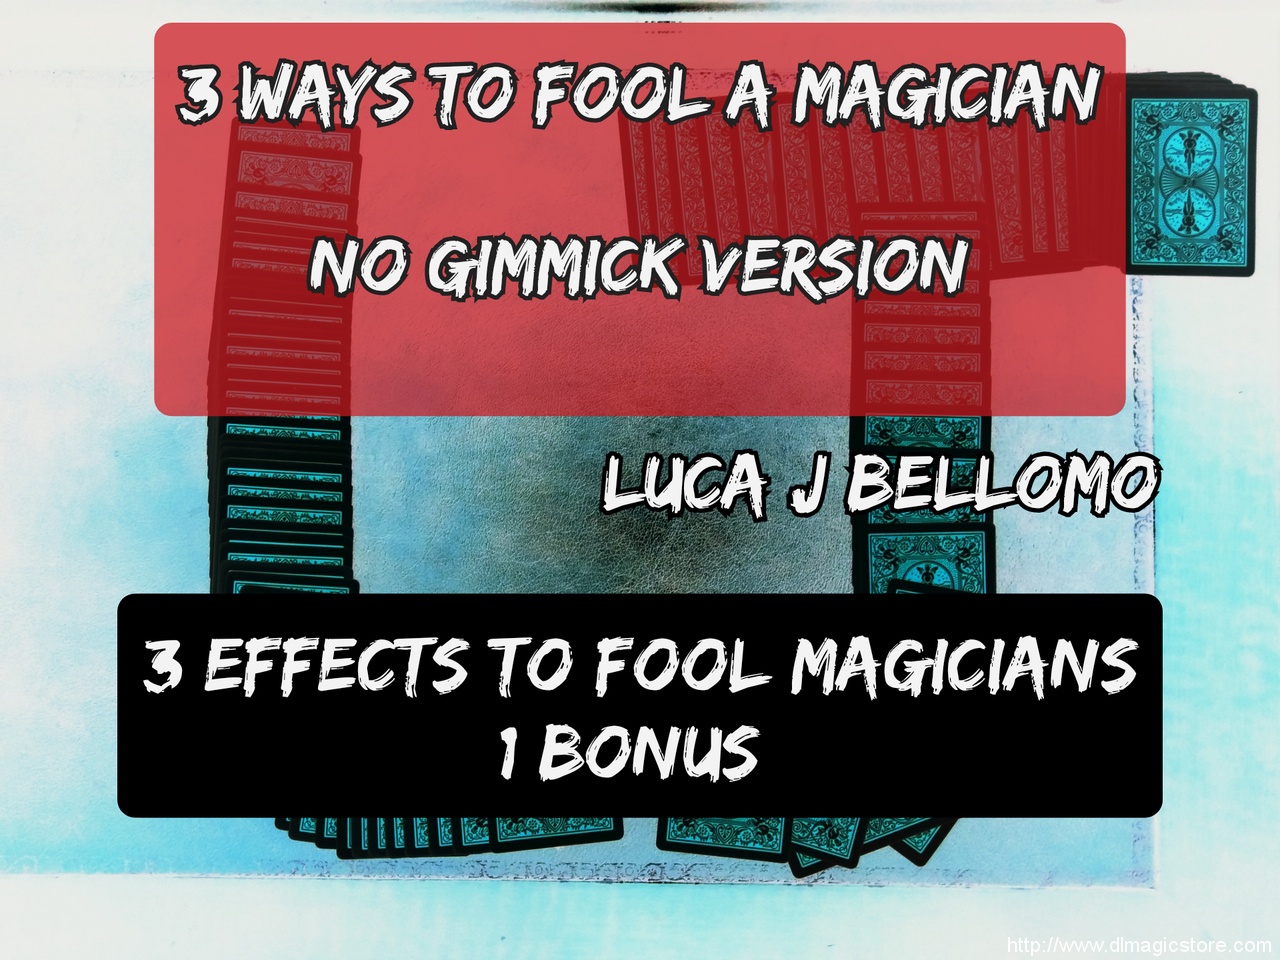 3 Ways to Fool a Magician (No Gimmick) by LJB (Instant Download)